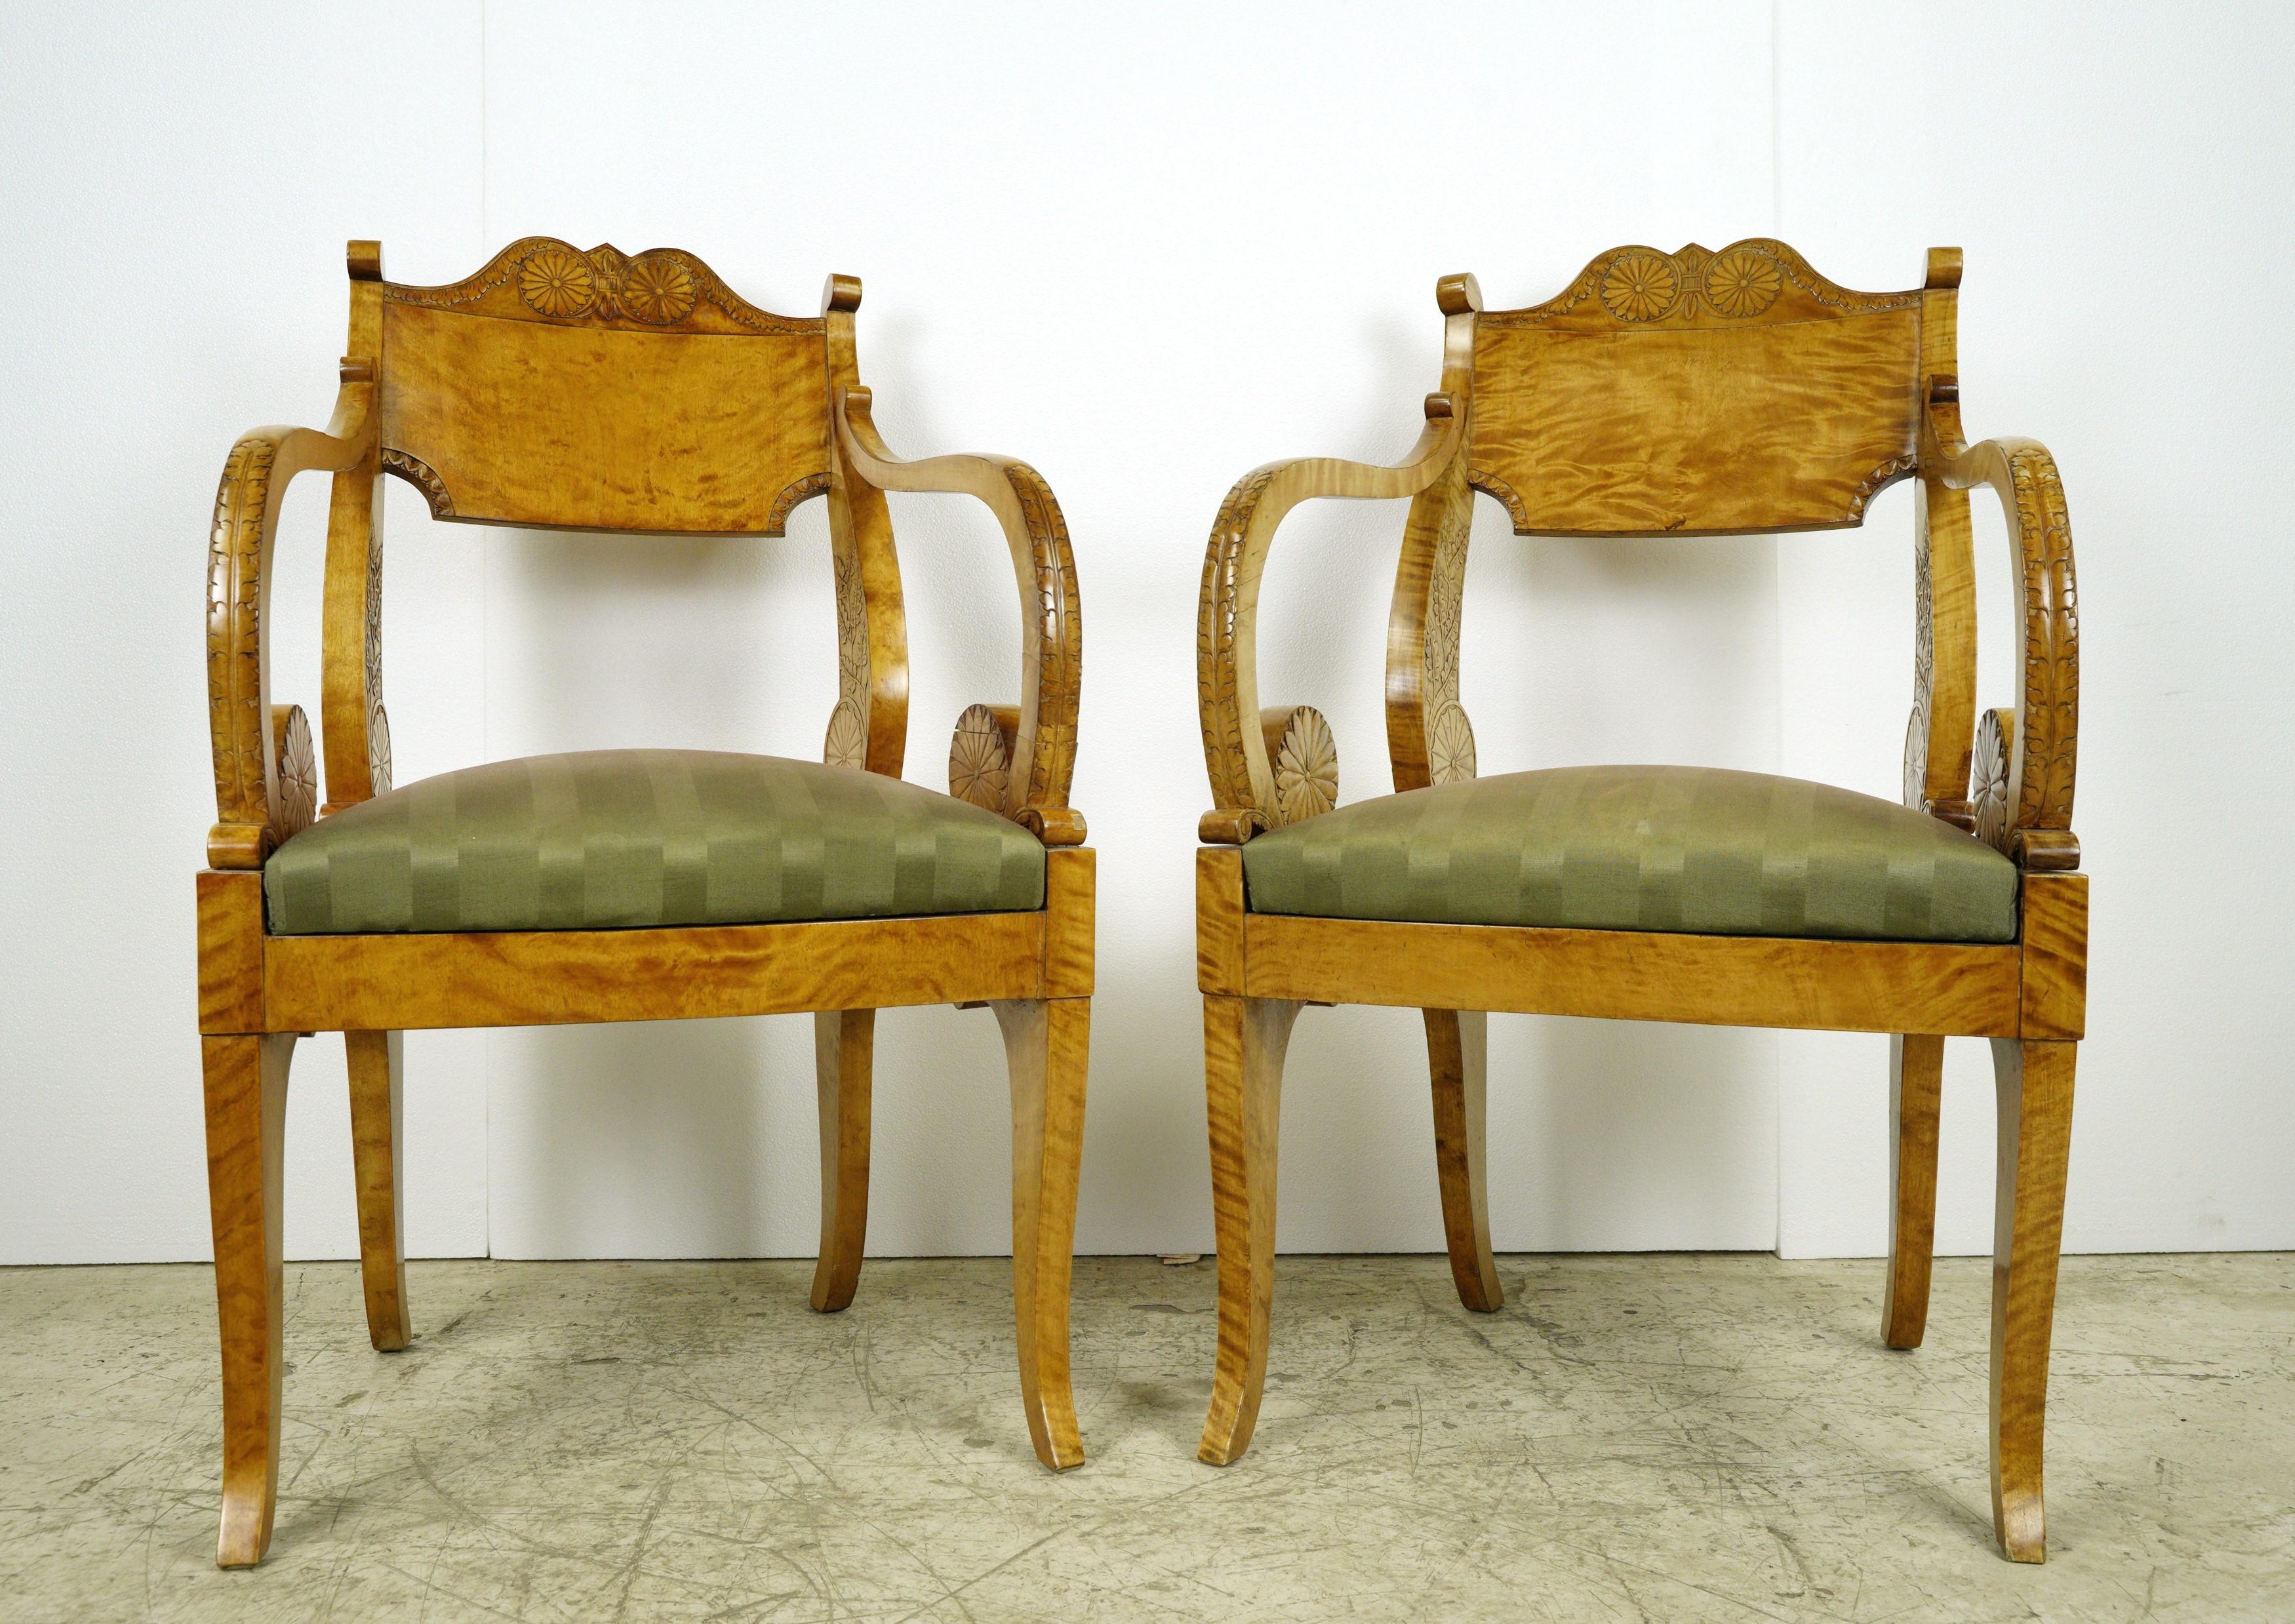 Antique Biedermeier Period Maple Chairs & Tea Table Set In Good Condition For Sale In New York, NY